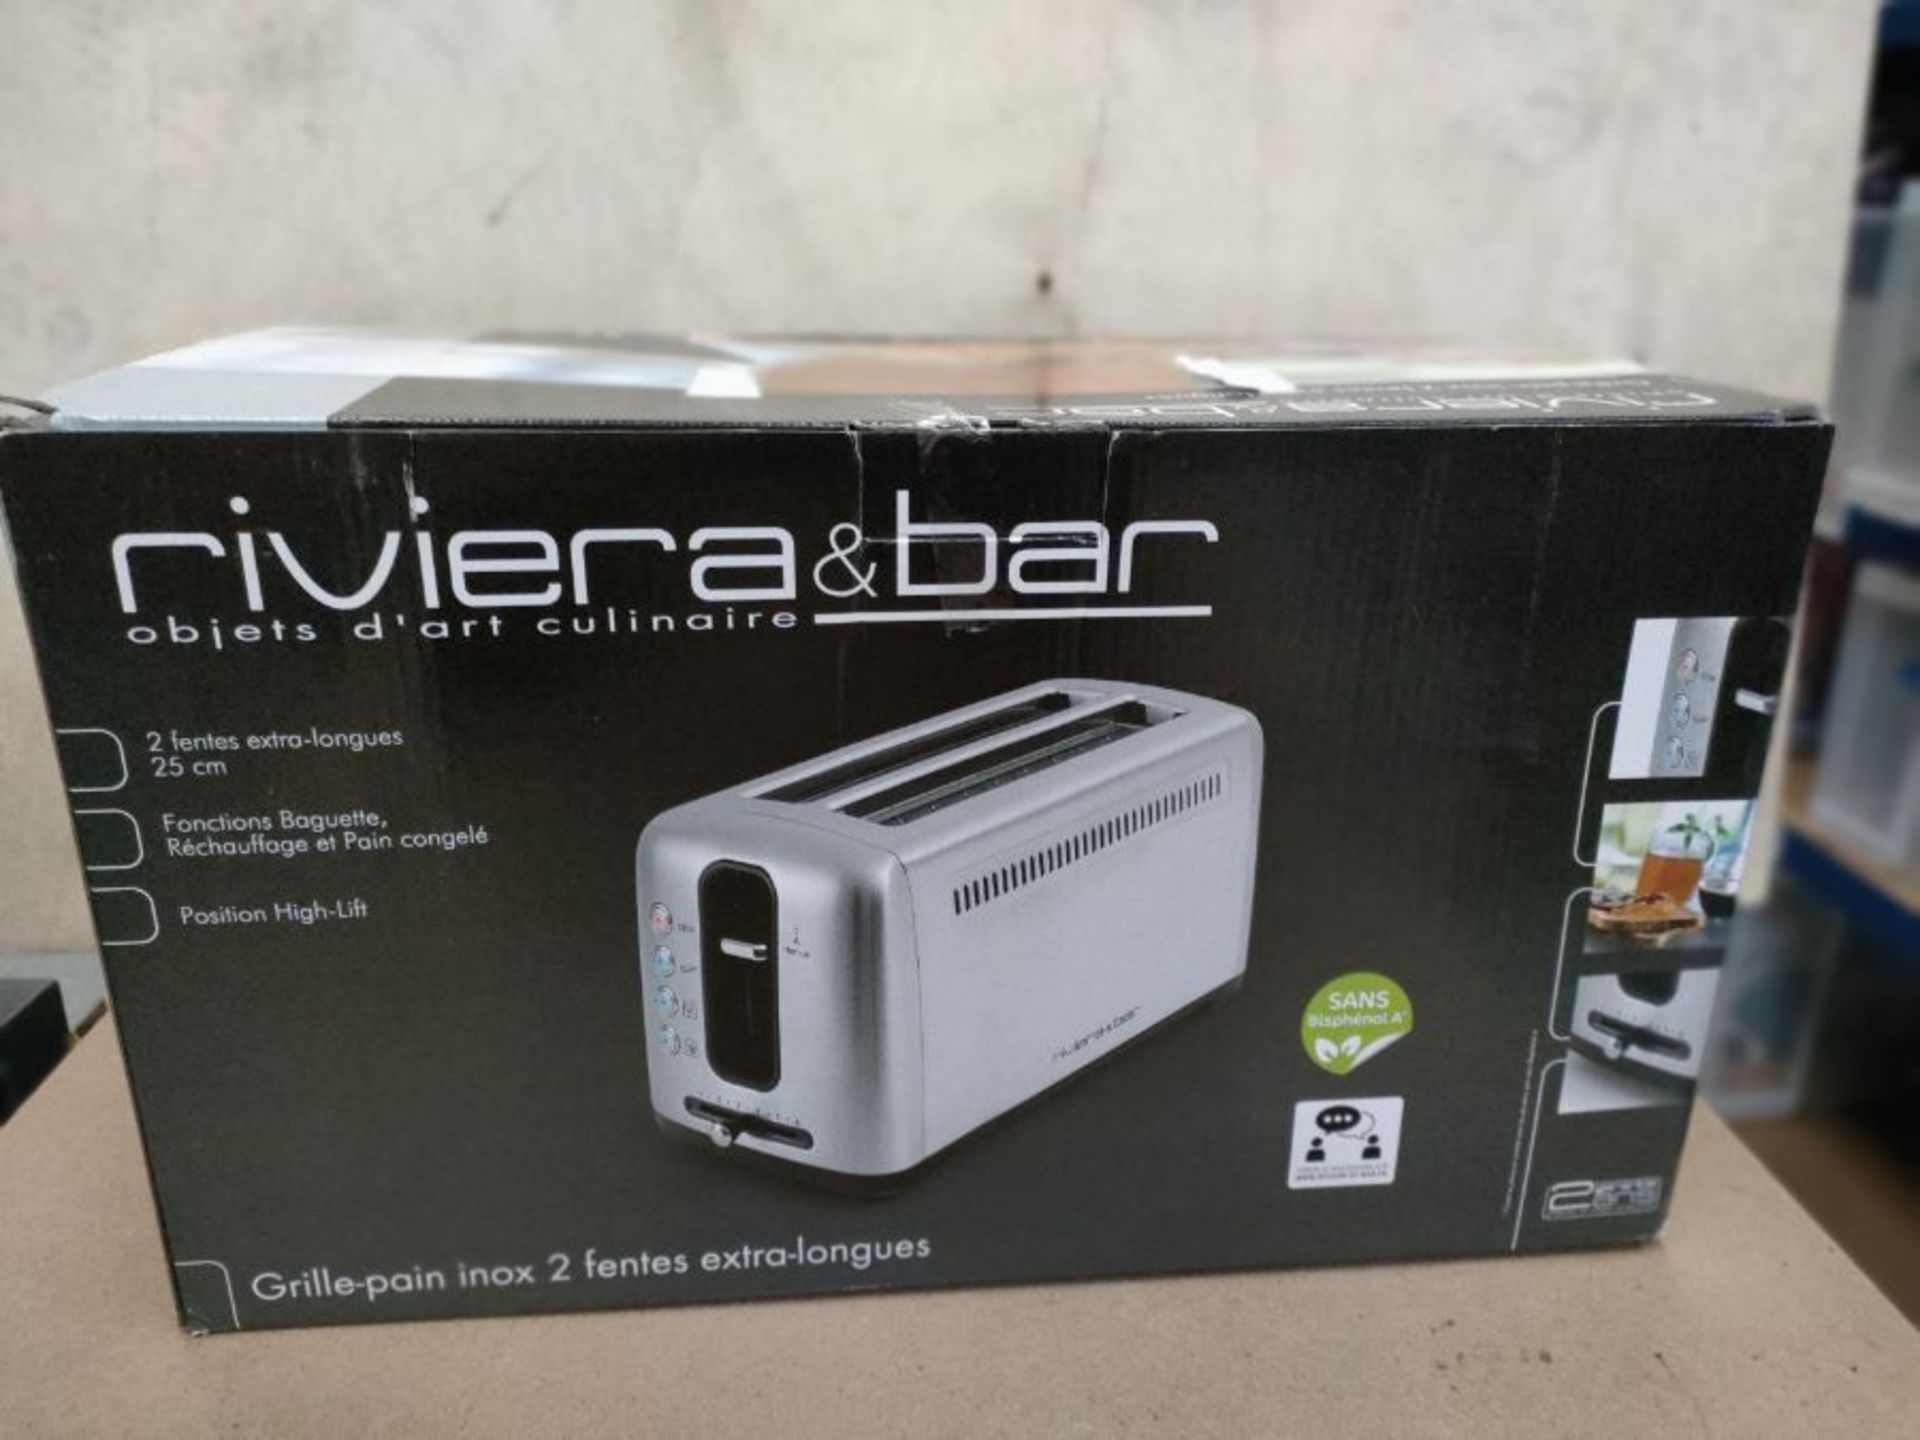 RRP £72.00 Riviera & Bar GP540A toaster - toasters - Image 2 of 3